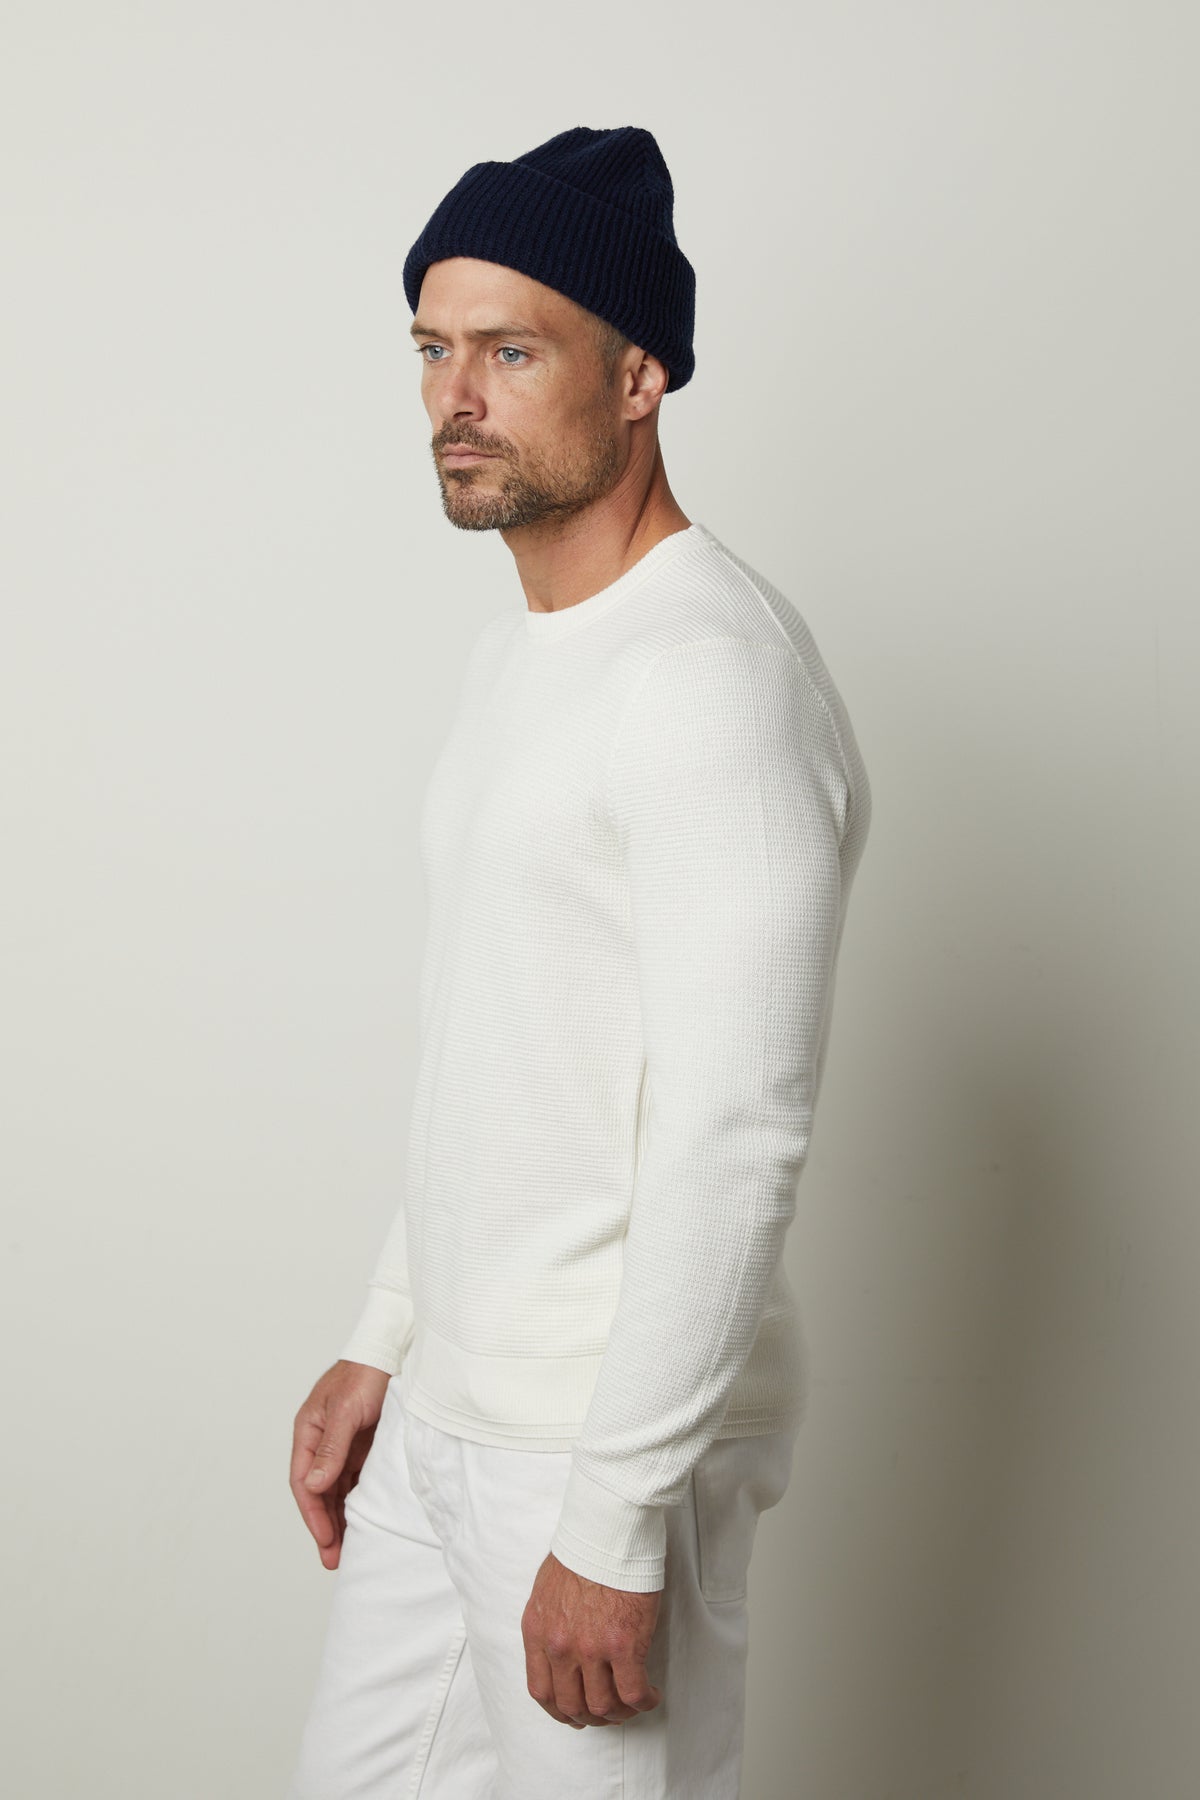 The model is wearing a WALTER CREW NECK SWEATER by Velvet by Graham & Spencer and white pants.-26846174445761